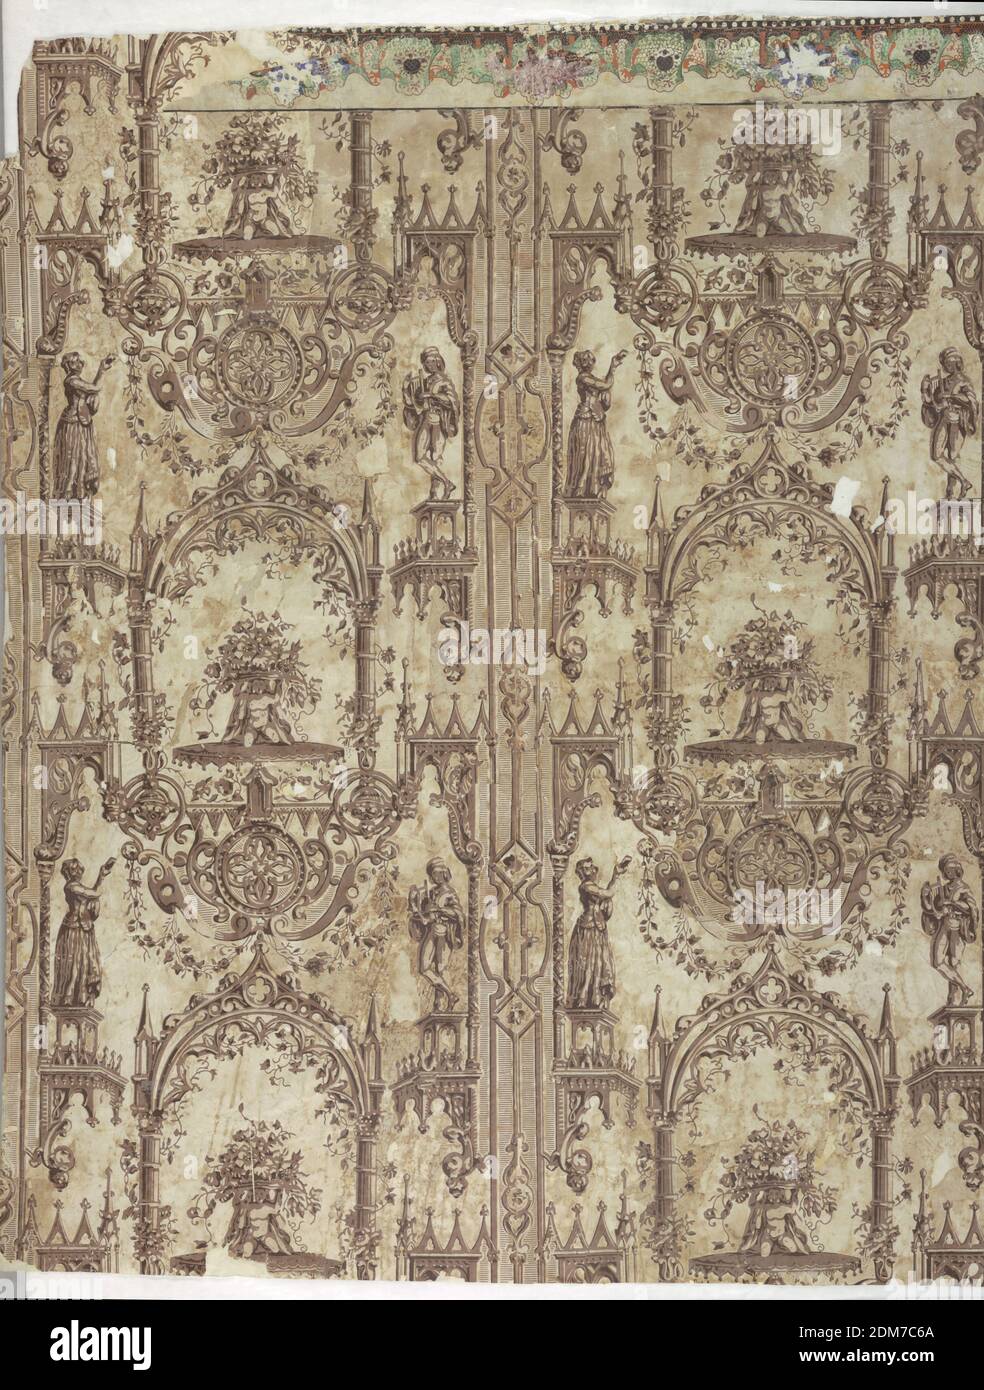 Sidewall, Block-printed on machine-made paper, satin ground, Gothic Revival pattern: a) patterned stripes run along edge of paper, half the stripe being printed along each edge to form a whole when hung: Gothic brackets project from the edging stripes to support on left, woman on right man playing lyre. In center: Gothic arch frames putto holding large dish of flowers, supported by fantastic concoction of gothic ornament. Block printed in black, brown, and what now appears to be white, but where protected by border appears peachy-pink, on white satin ground; b) Simulation of gathered lace Stock Photo